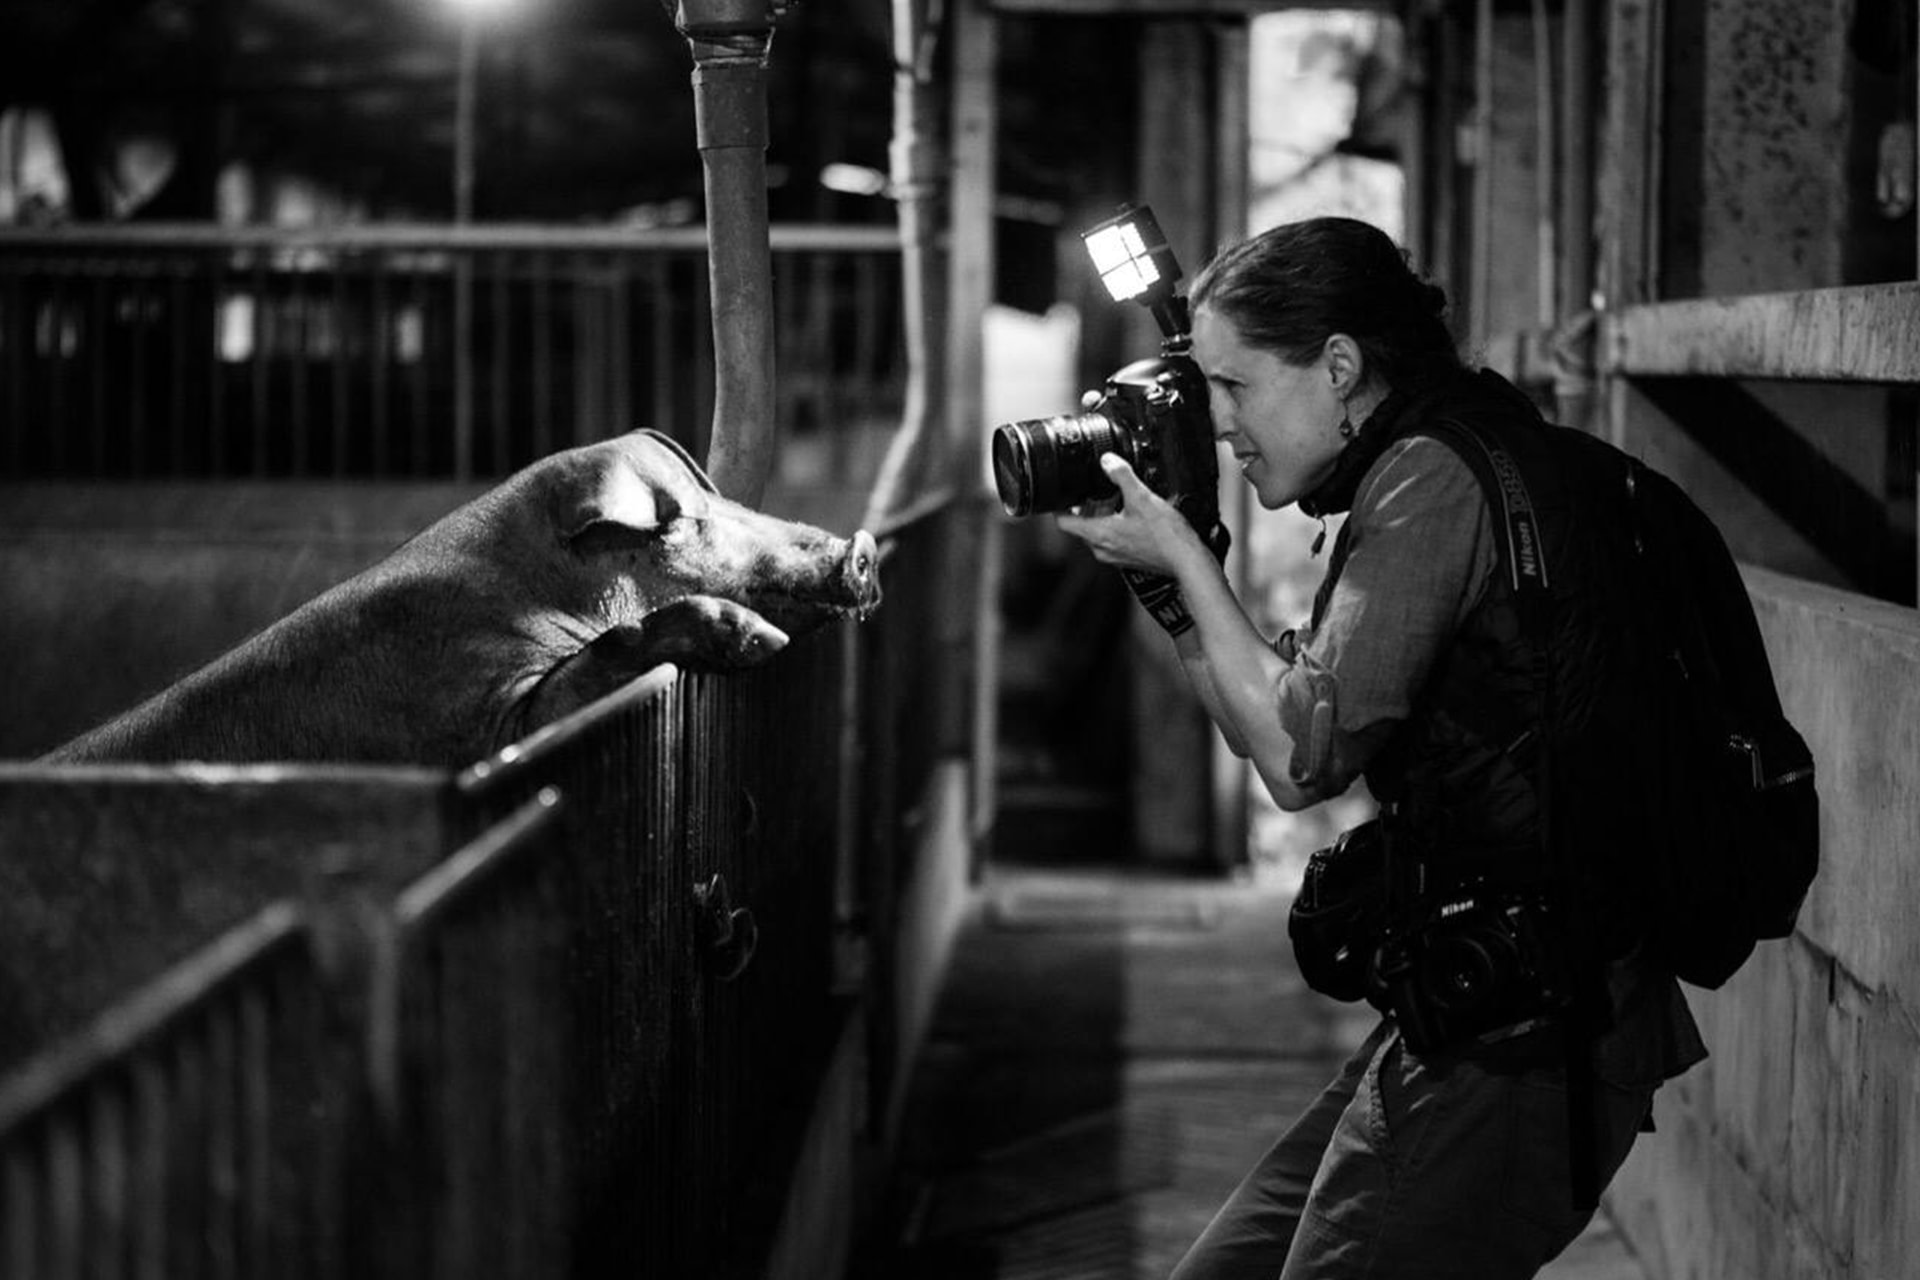 We Animals Media Founder Jo-Anne McArthur documenting conditions inside a pig farm. Taiwan, 2019. Kelly Guerin / We Animals Media